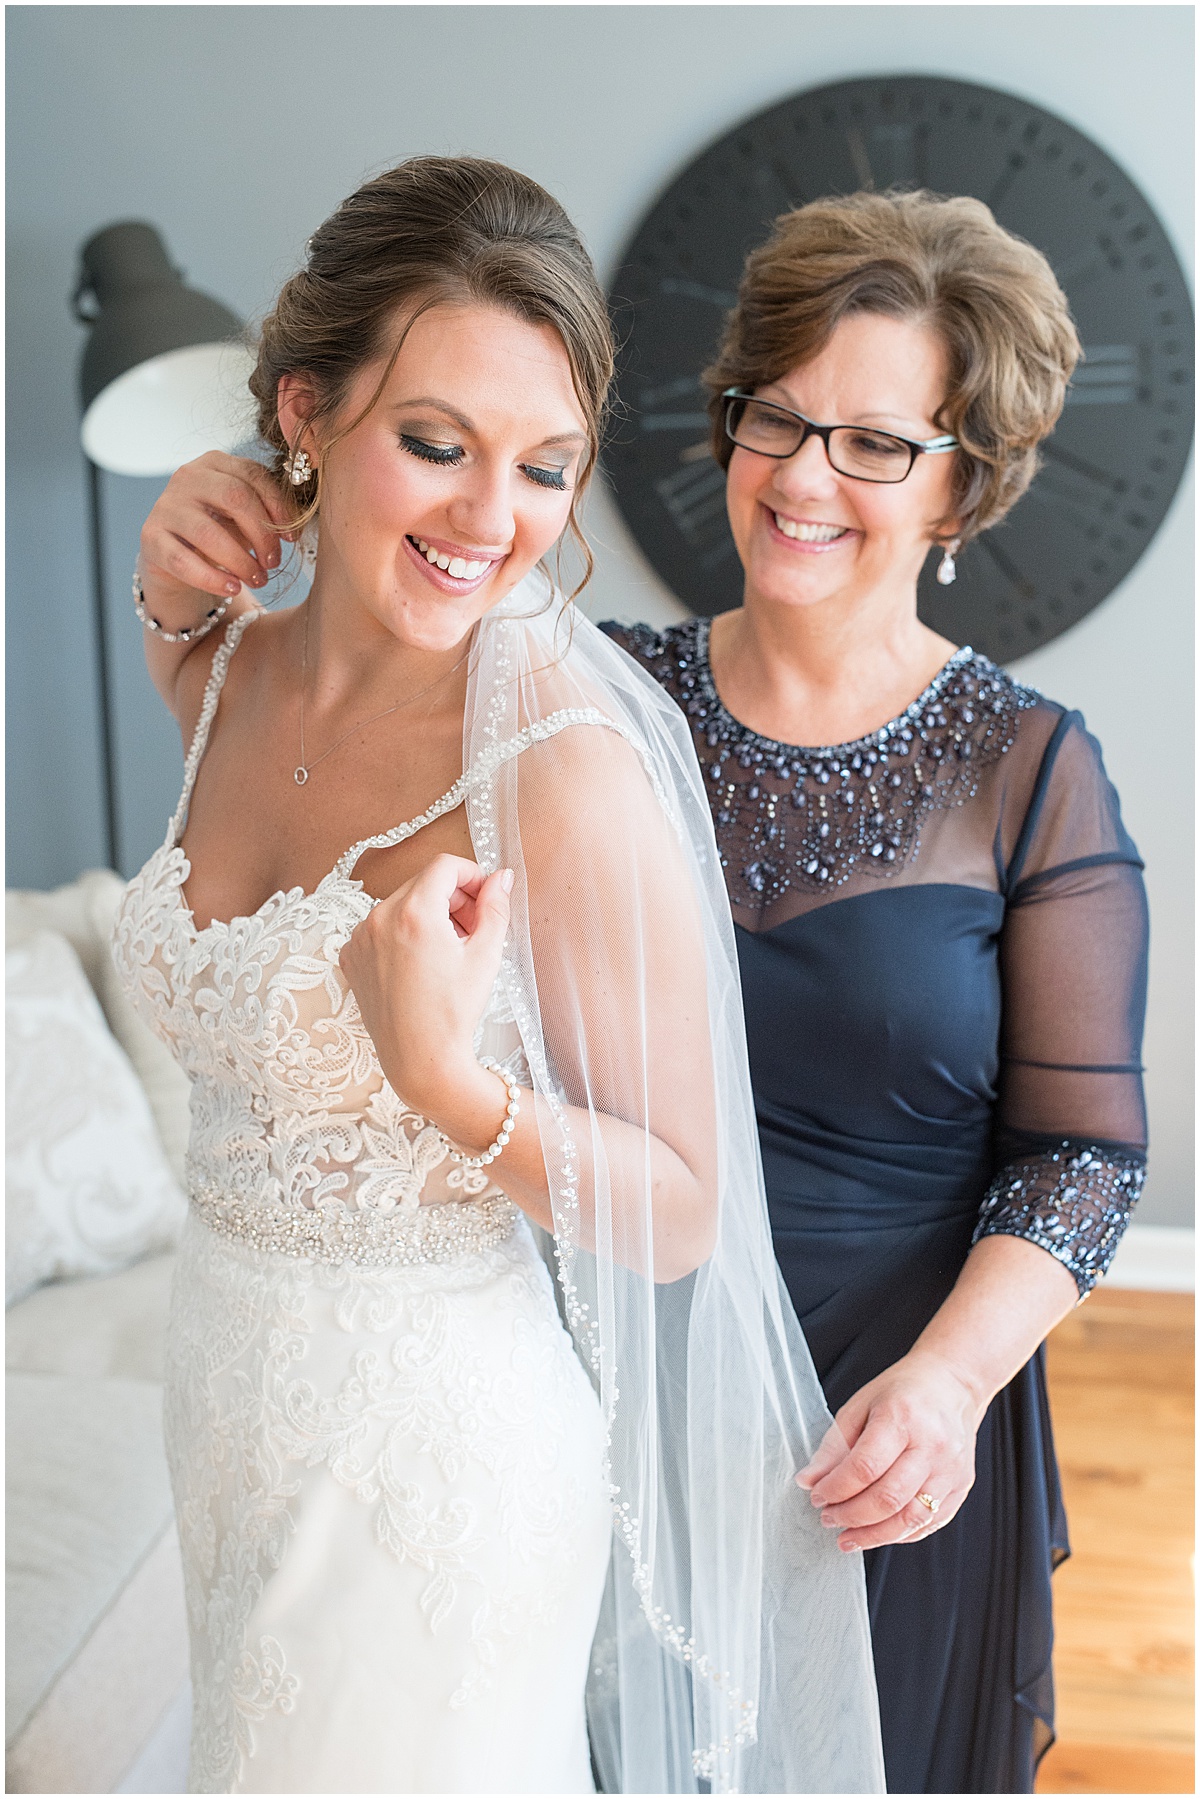 Mother of the bride helps bride get ready for Rensselaer, Indiana wedding